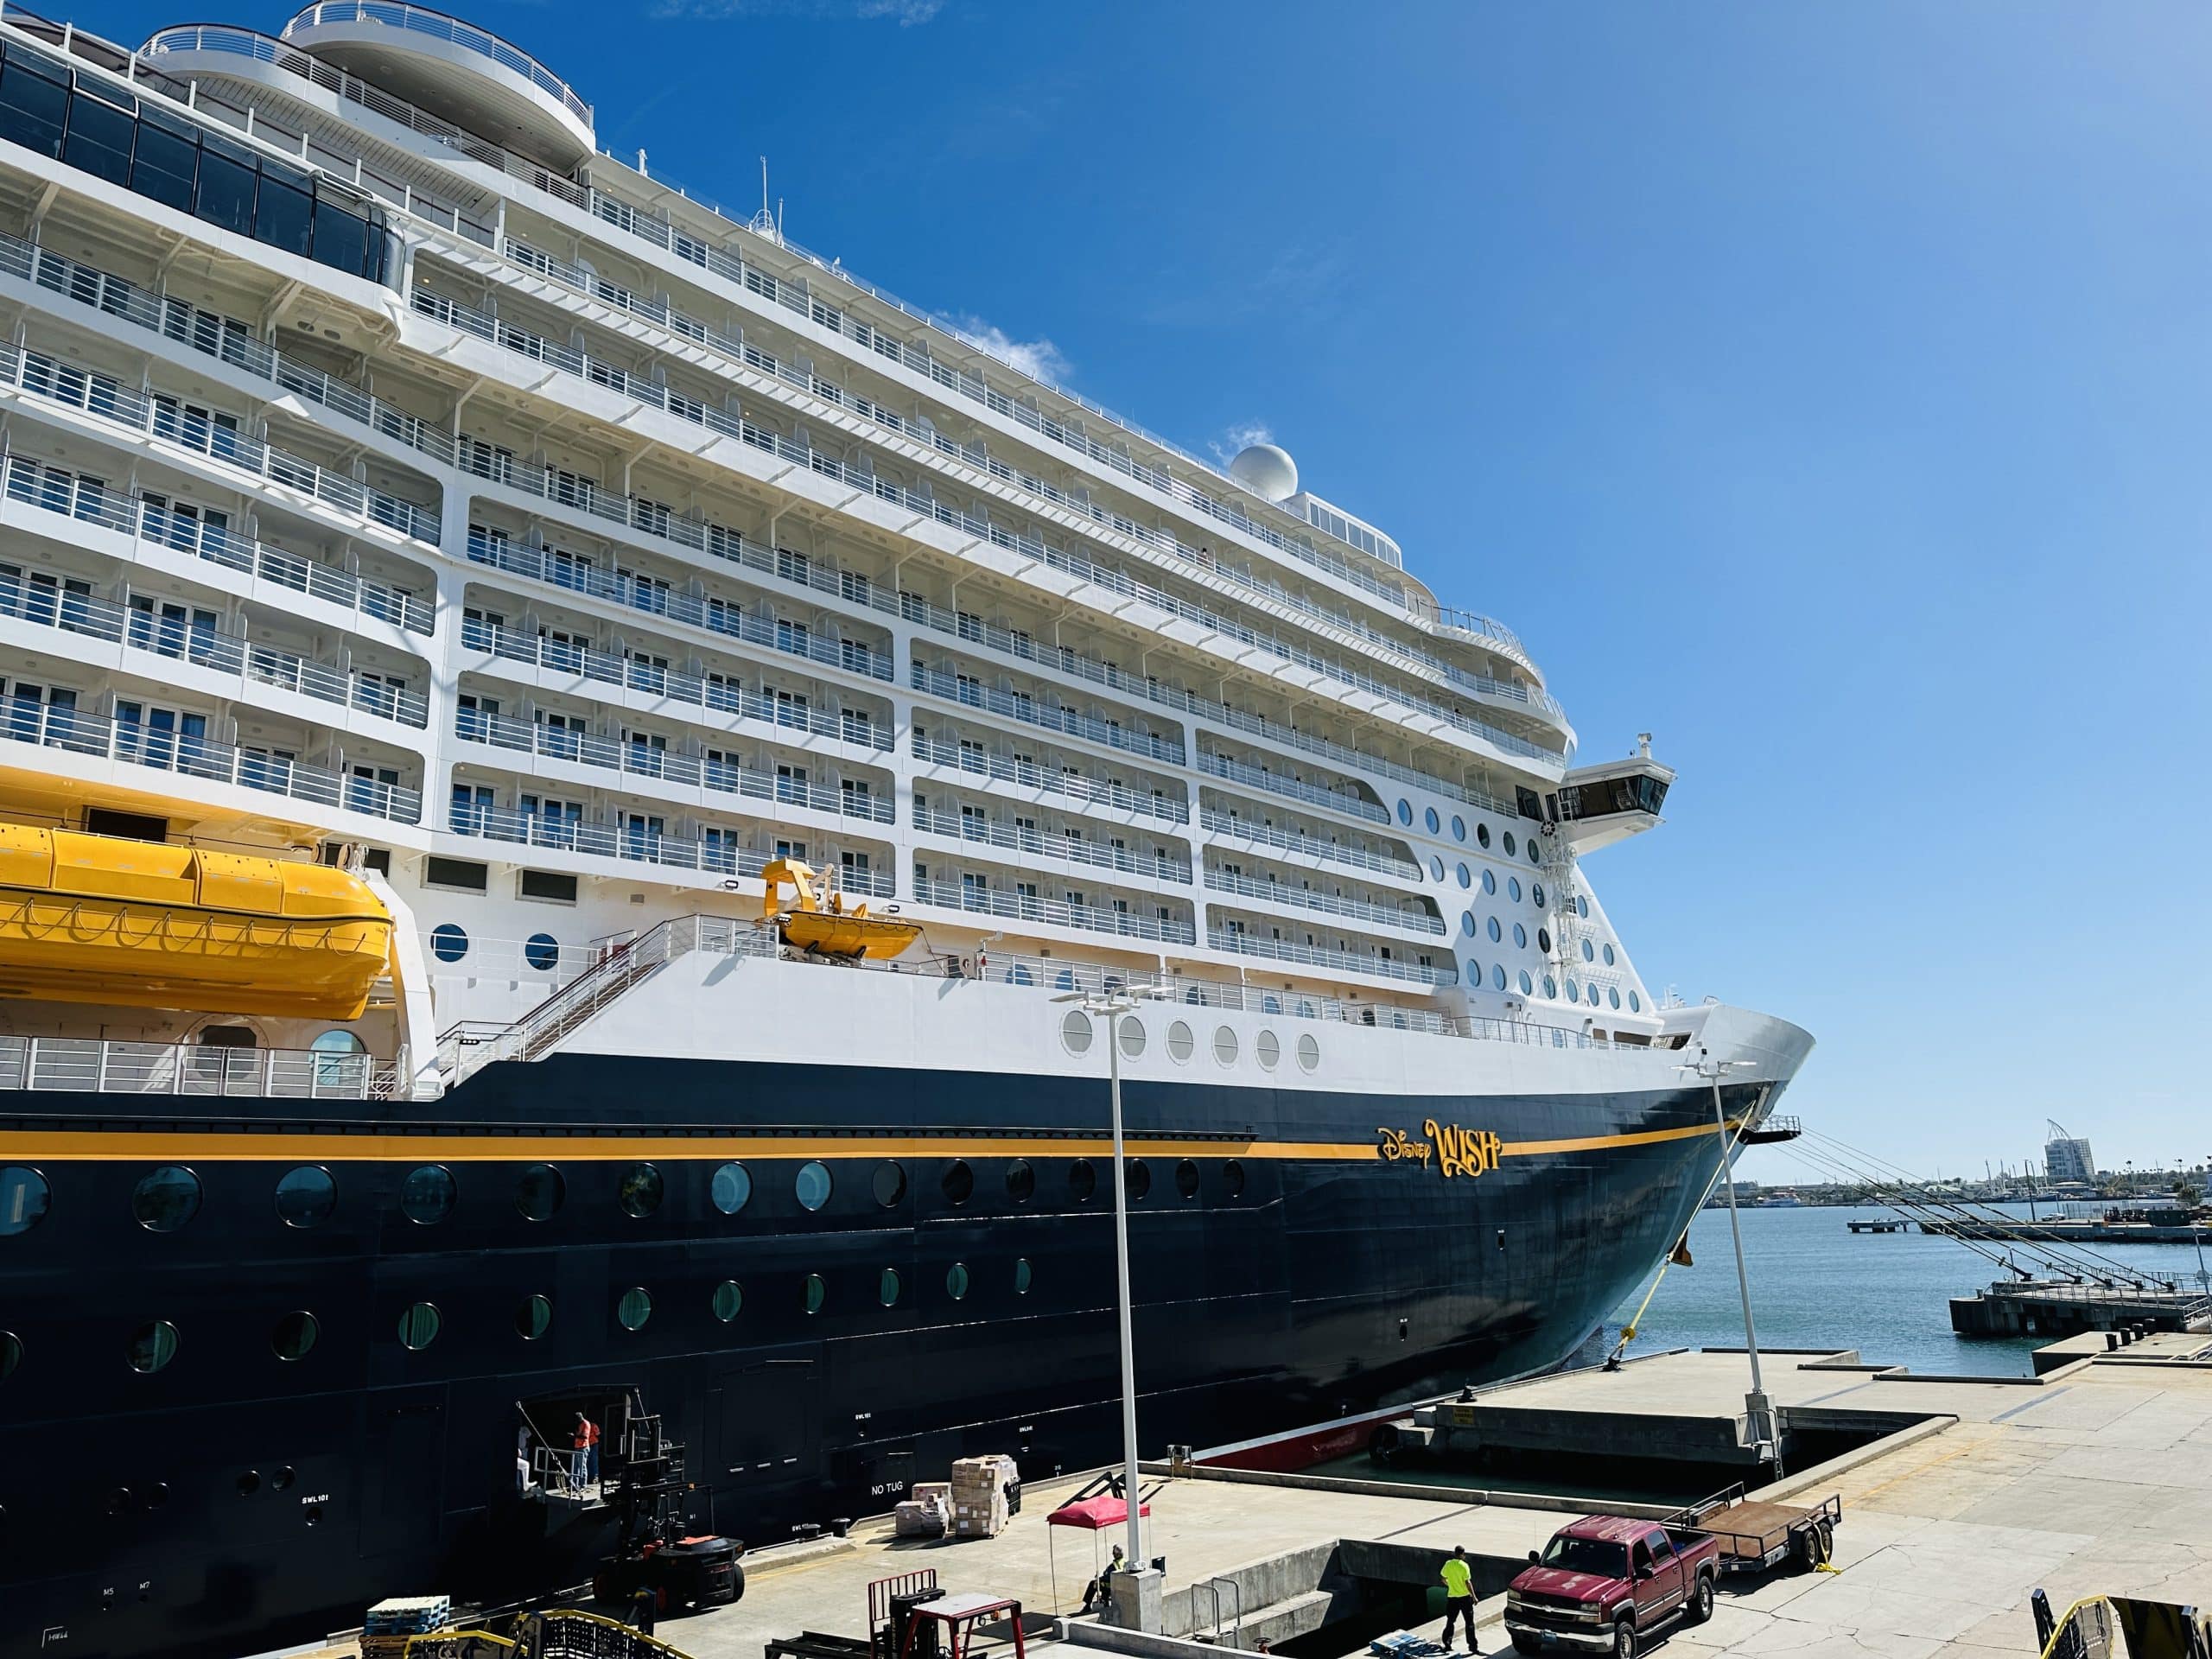 Embarking on Magic: 5 Essential Tips for Your First Disney Cruise